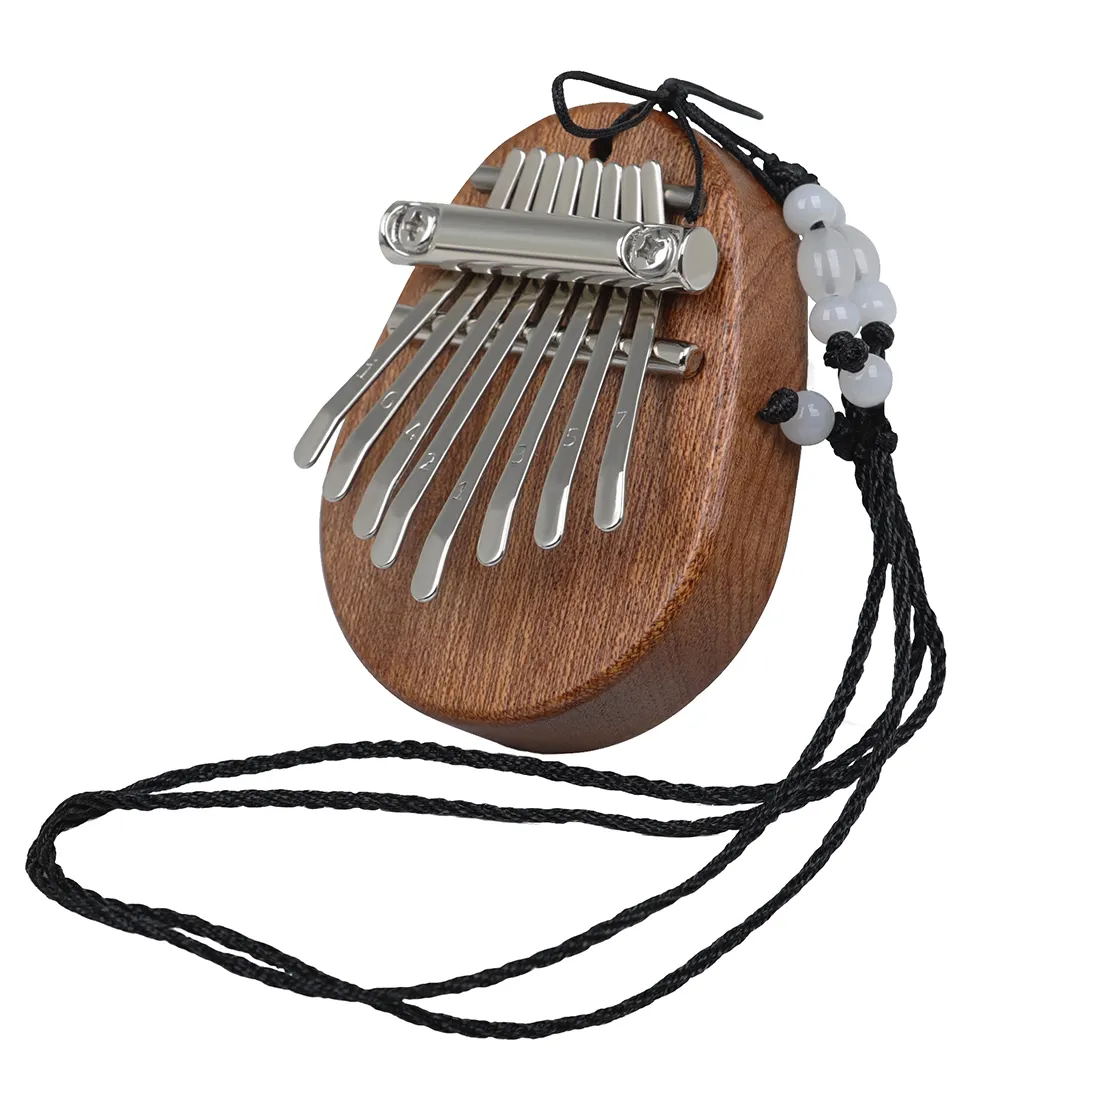 Hot Selling Portable Wooden Necklace Mini African Musical Instrument Kalimba 8 Keys Thumb Piano